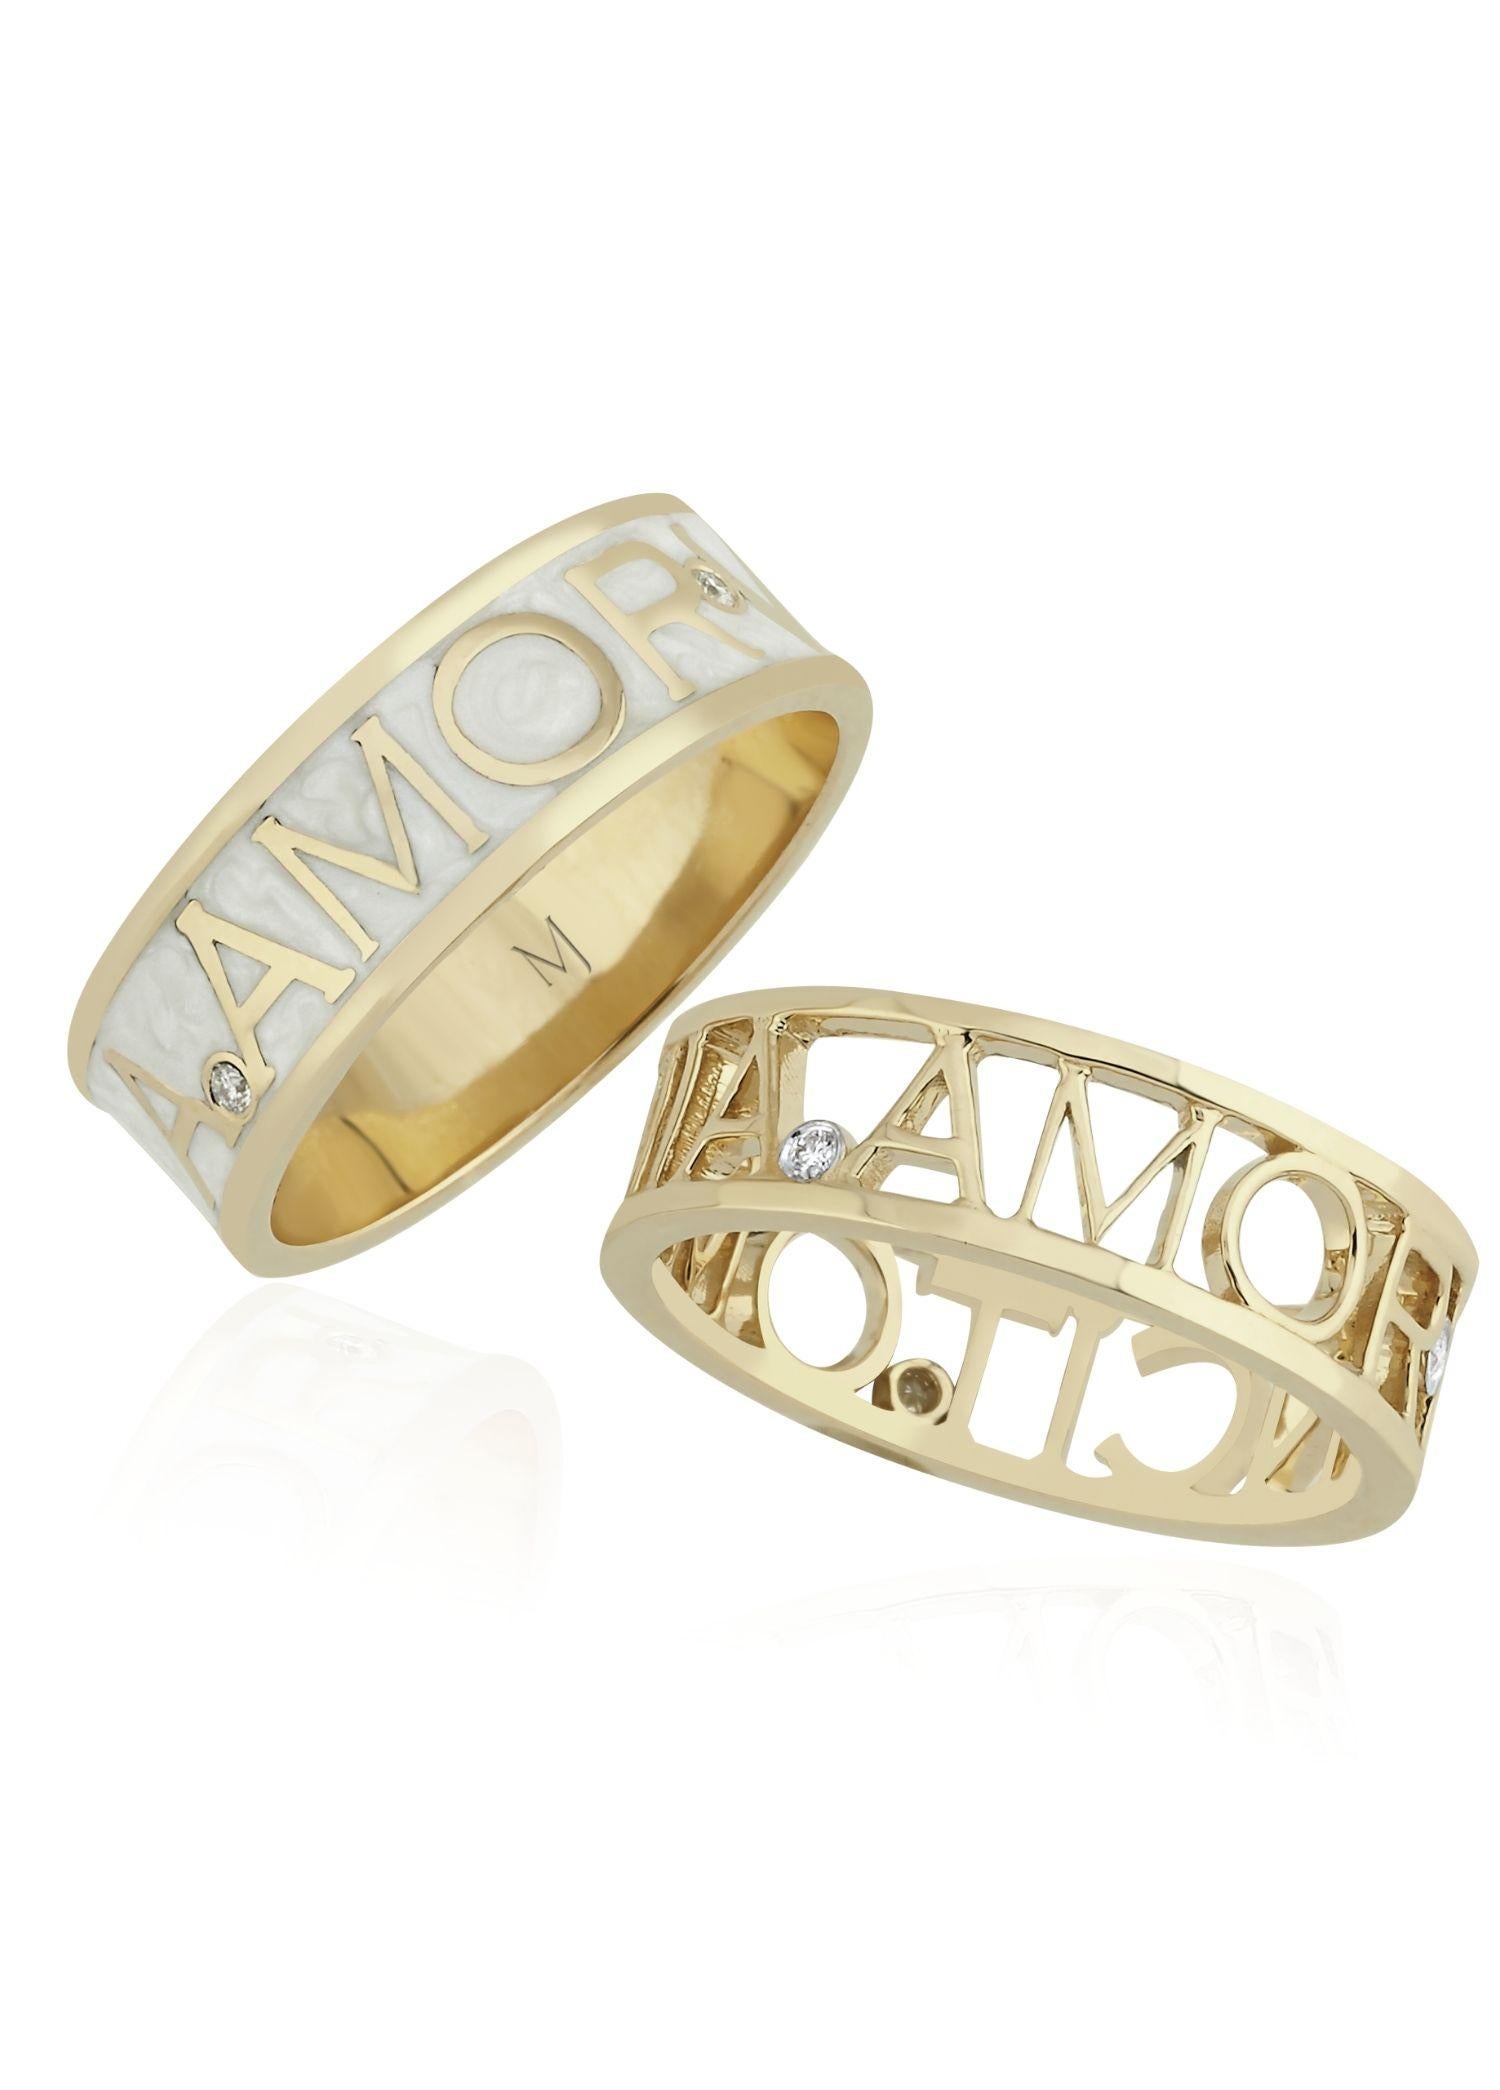 Melie Jewelry Amor Vincit Omnia Ring

14K Gold Yellow Gold, 0.03 ct Diamond/ G-VS

The Story Behind
Inspired by the phrase 